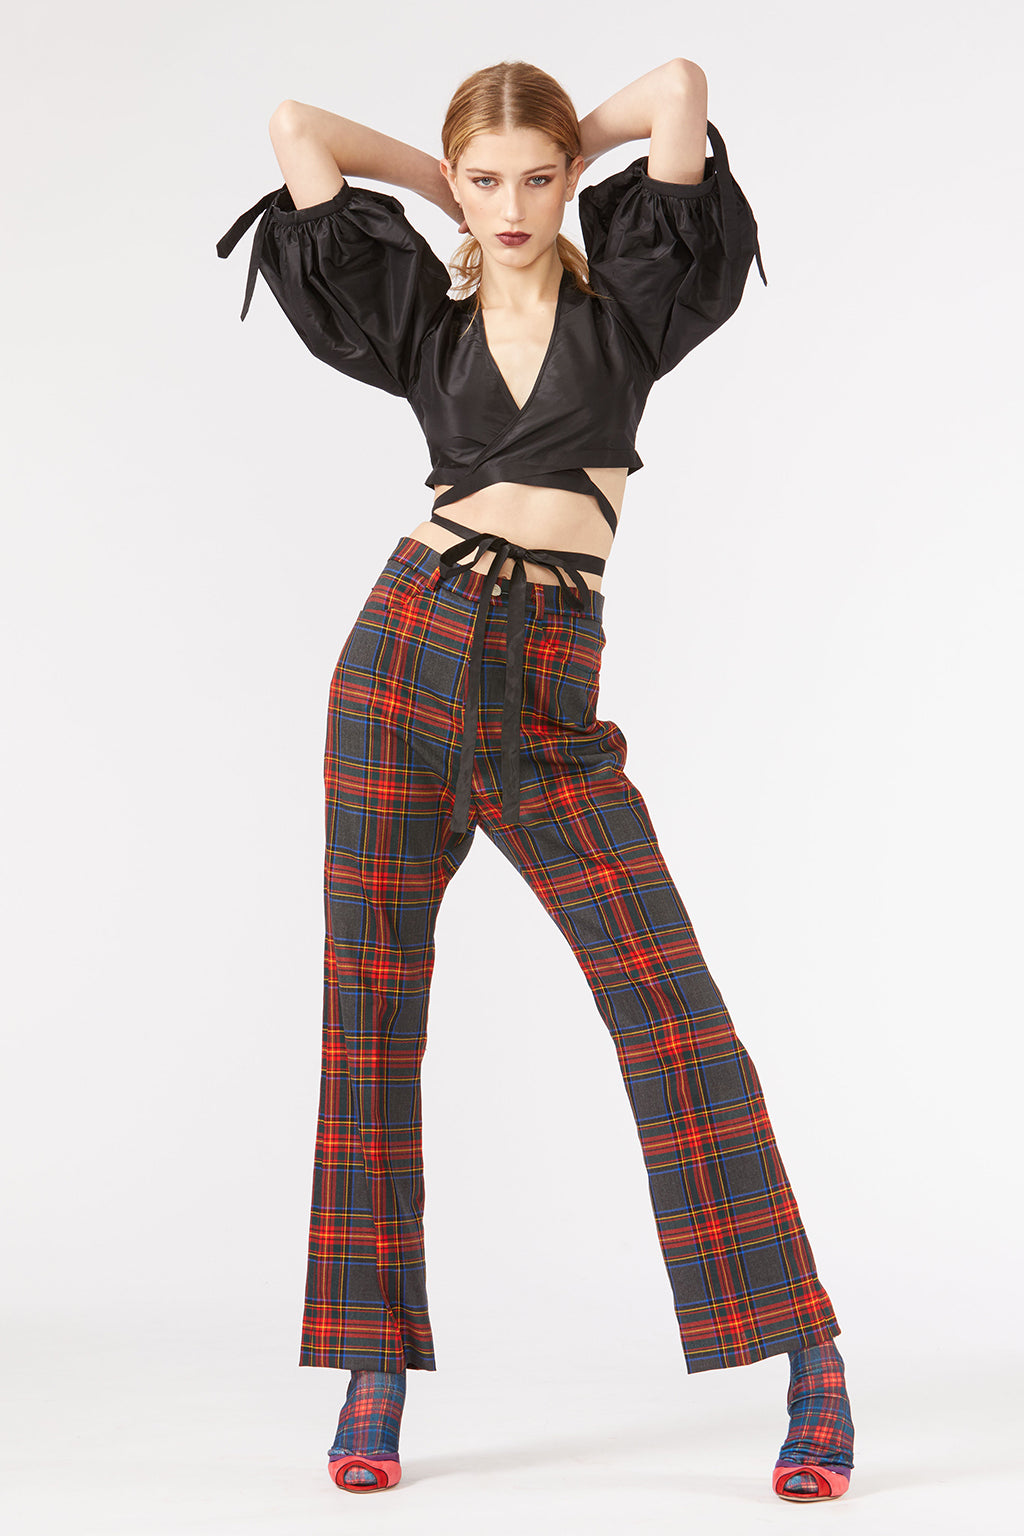 Cynthia Rowley Fall 2018 look 23 featuring plaid pants and cropped black taffeta top with puff sleeves and tie around waist.